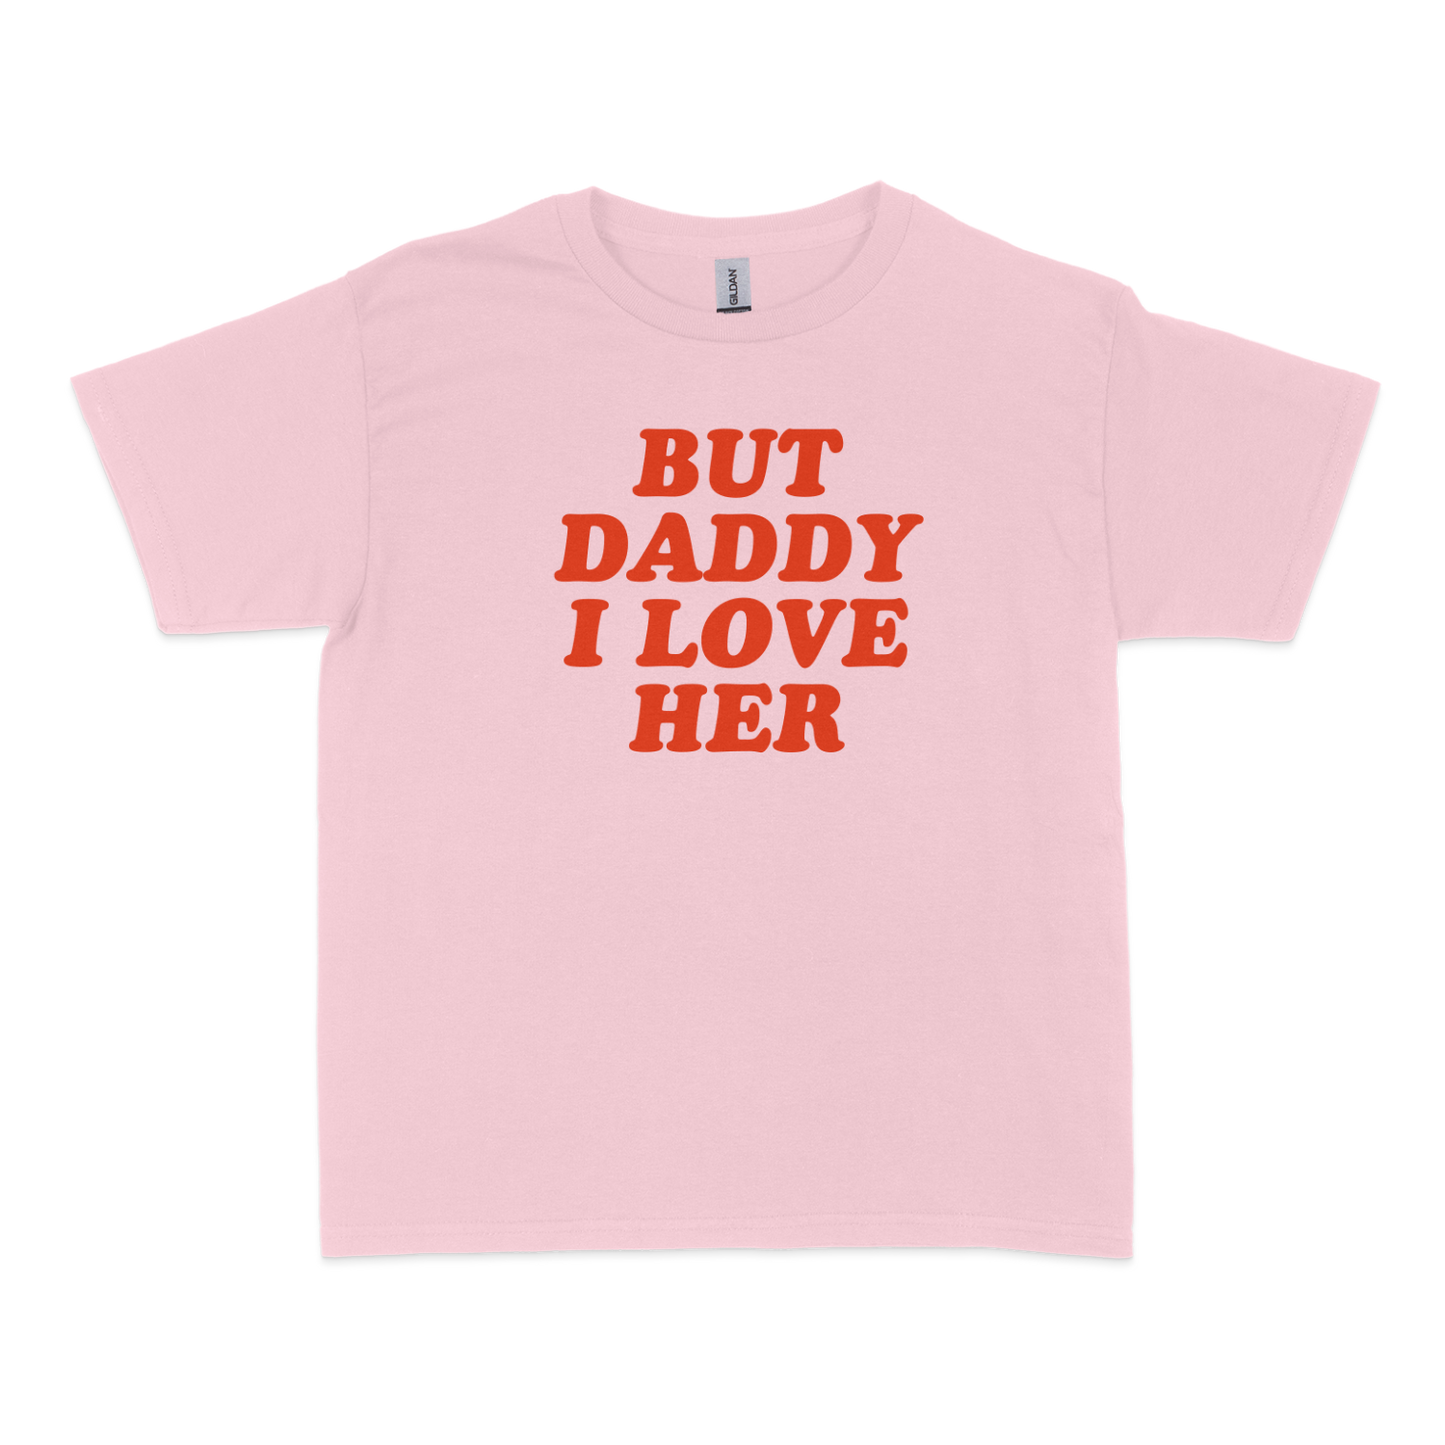 But Daddy I Love Her Baby Tee